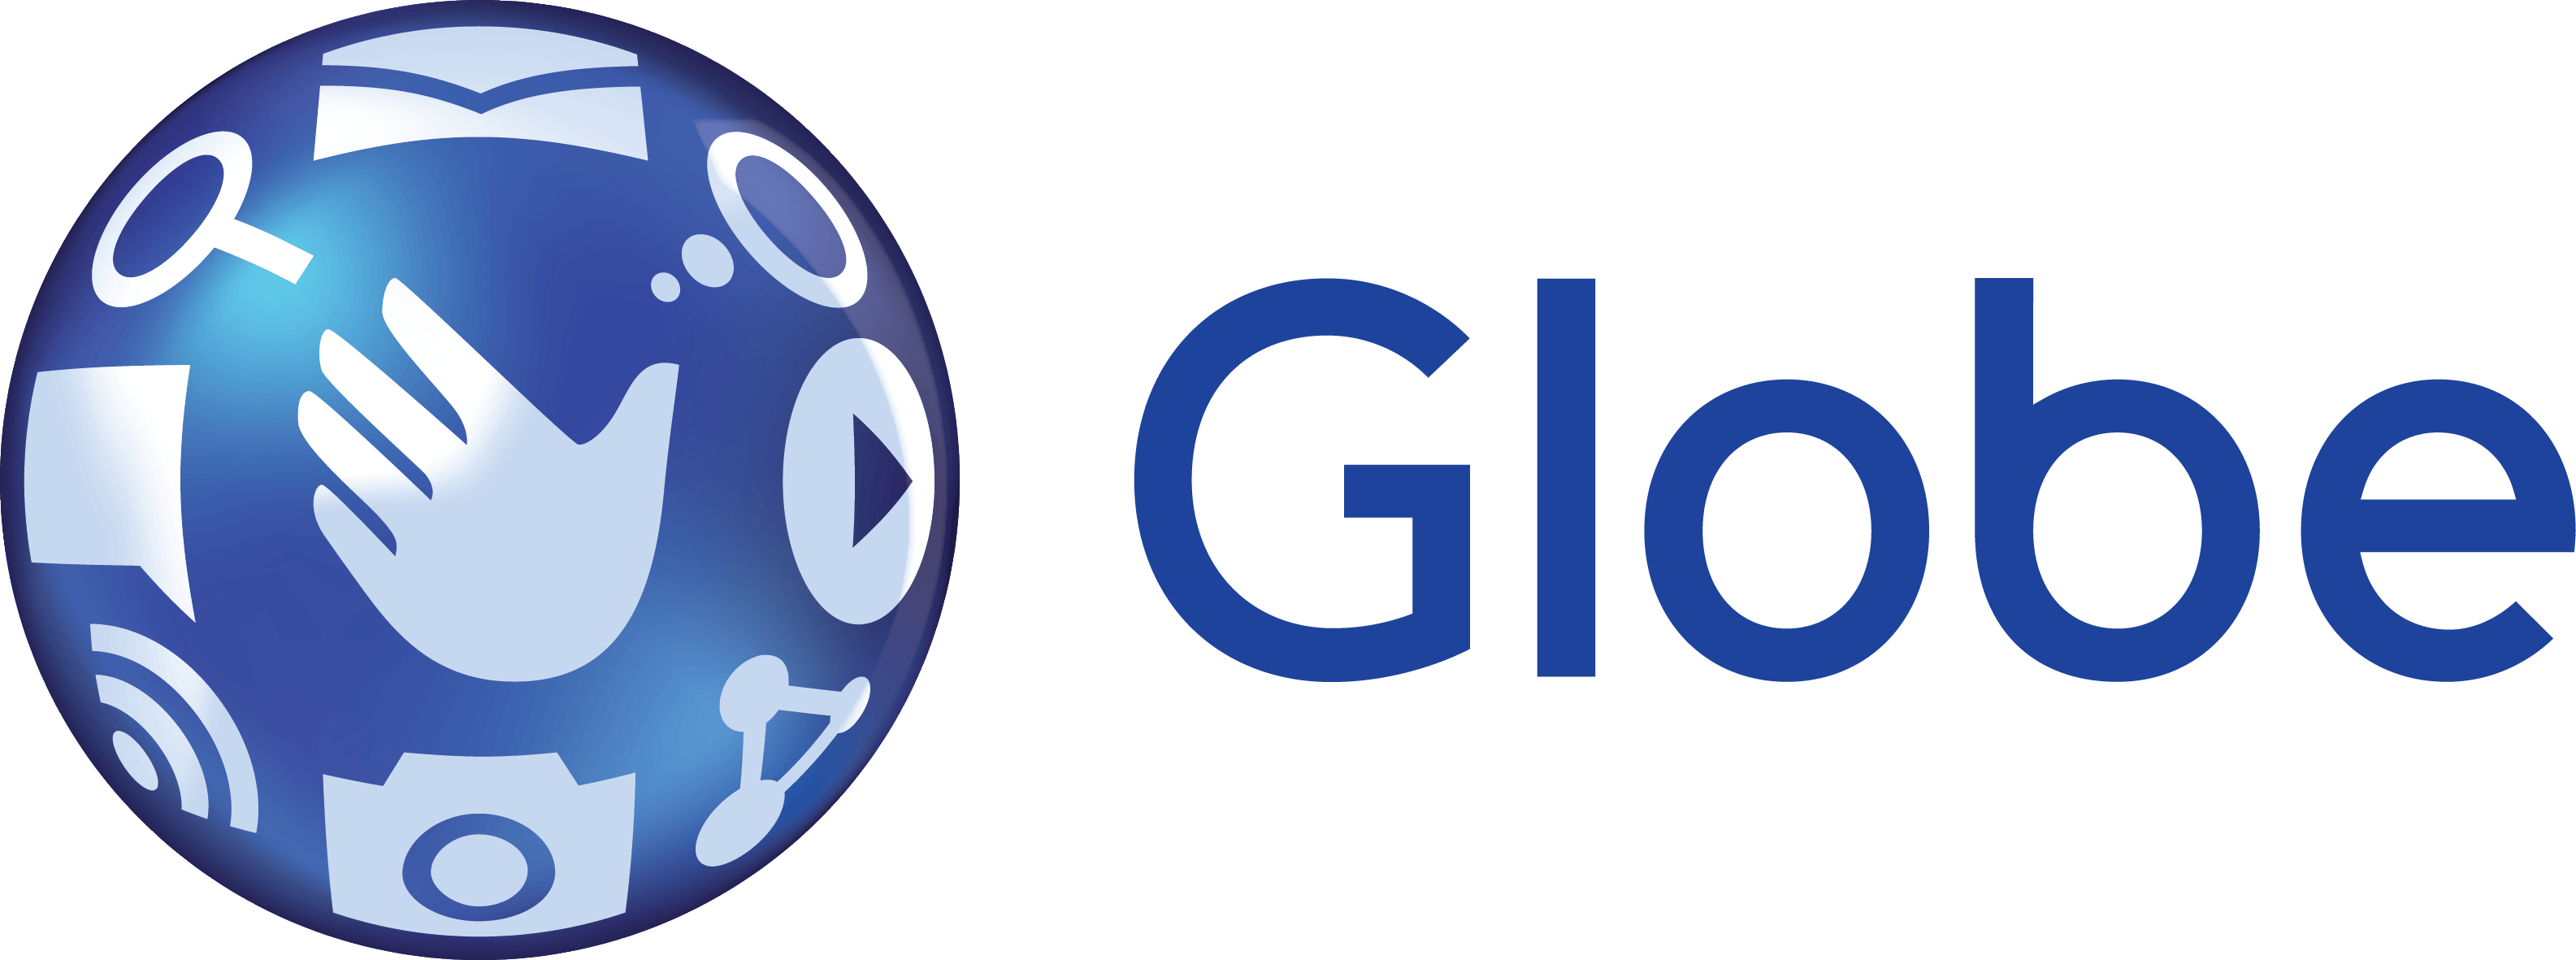 Pacific Globe Logo - Globe stWorldInternetPH is best telecom campaign in Asia Pacific